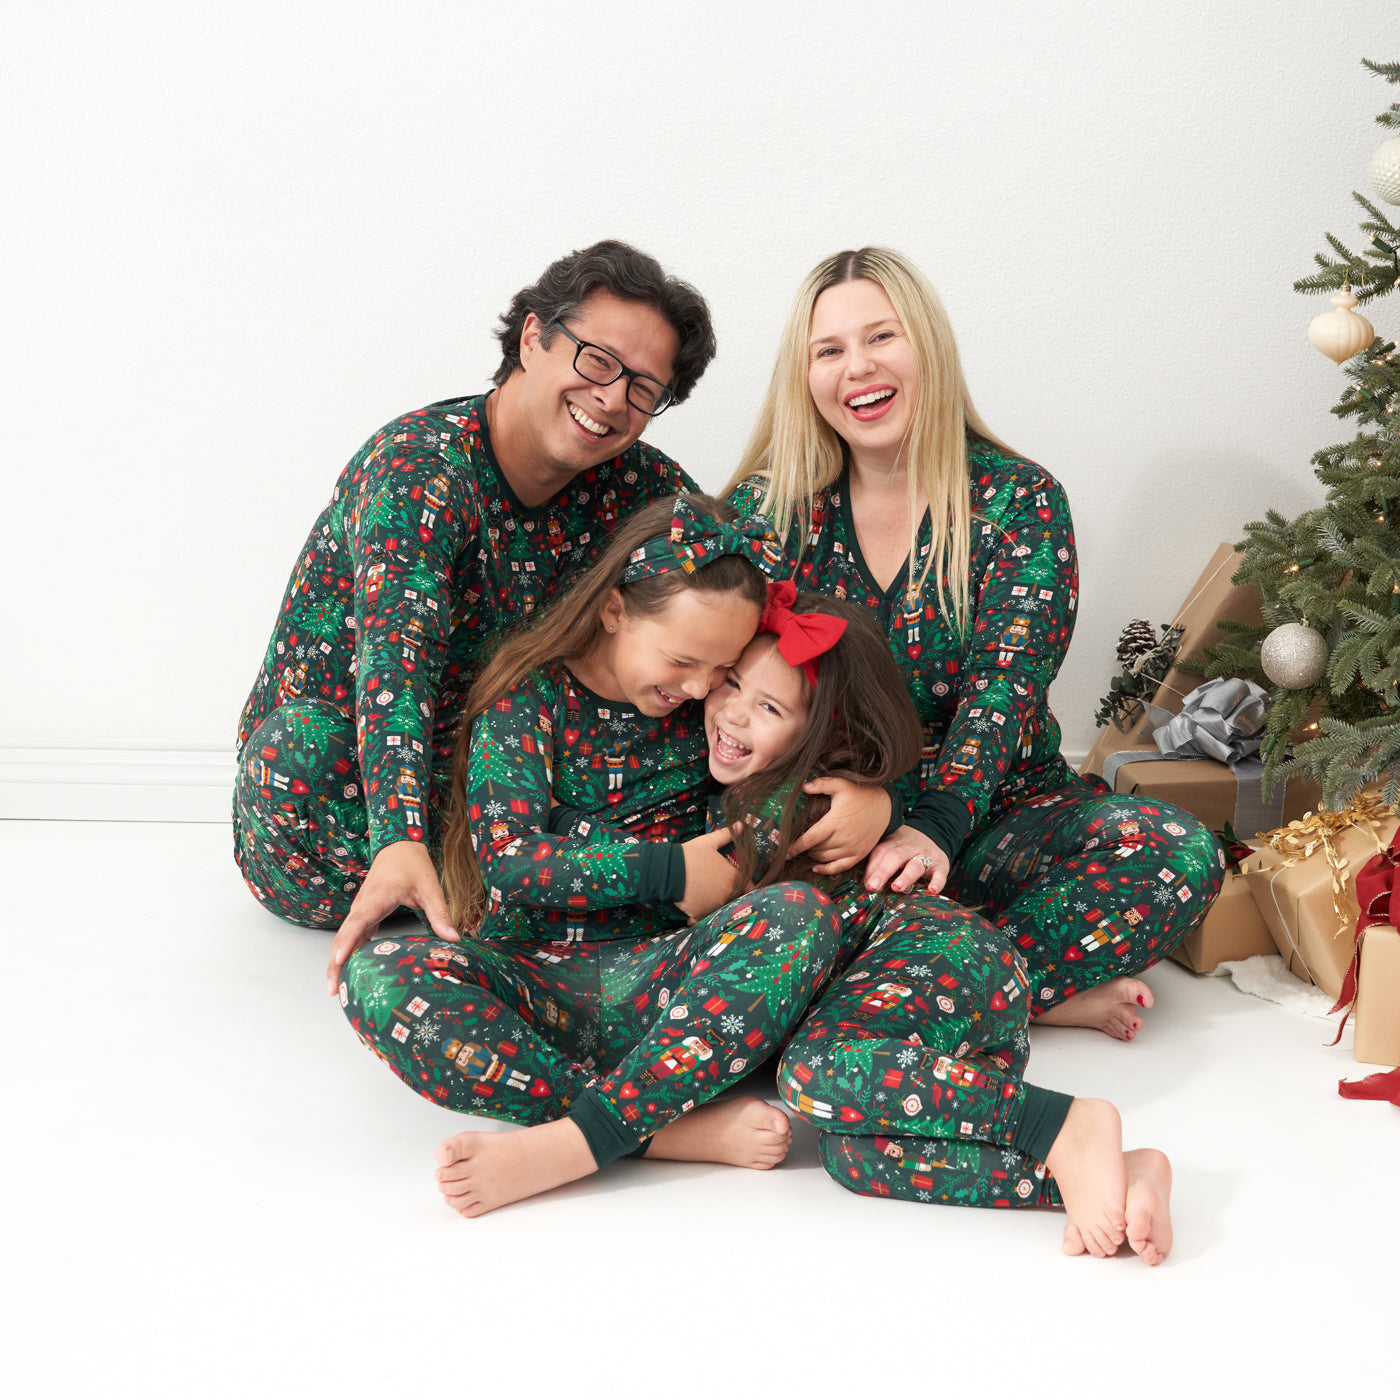 Dad and his two daughter posing wearing Night at the Nutcracker pajama sets. Dad is wearing a Men's Night at the Nutcracker printed men's pajama top and men's pajama bottoms. The older daughter is wearing a two piece Night at the Nutcracker two piece pajama set paired with a matching luxe bow headband. Their youngest child is wearing a Night at the Nutcracker printed zippy paired with a matching luxe bow headband